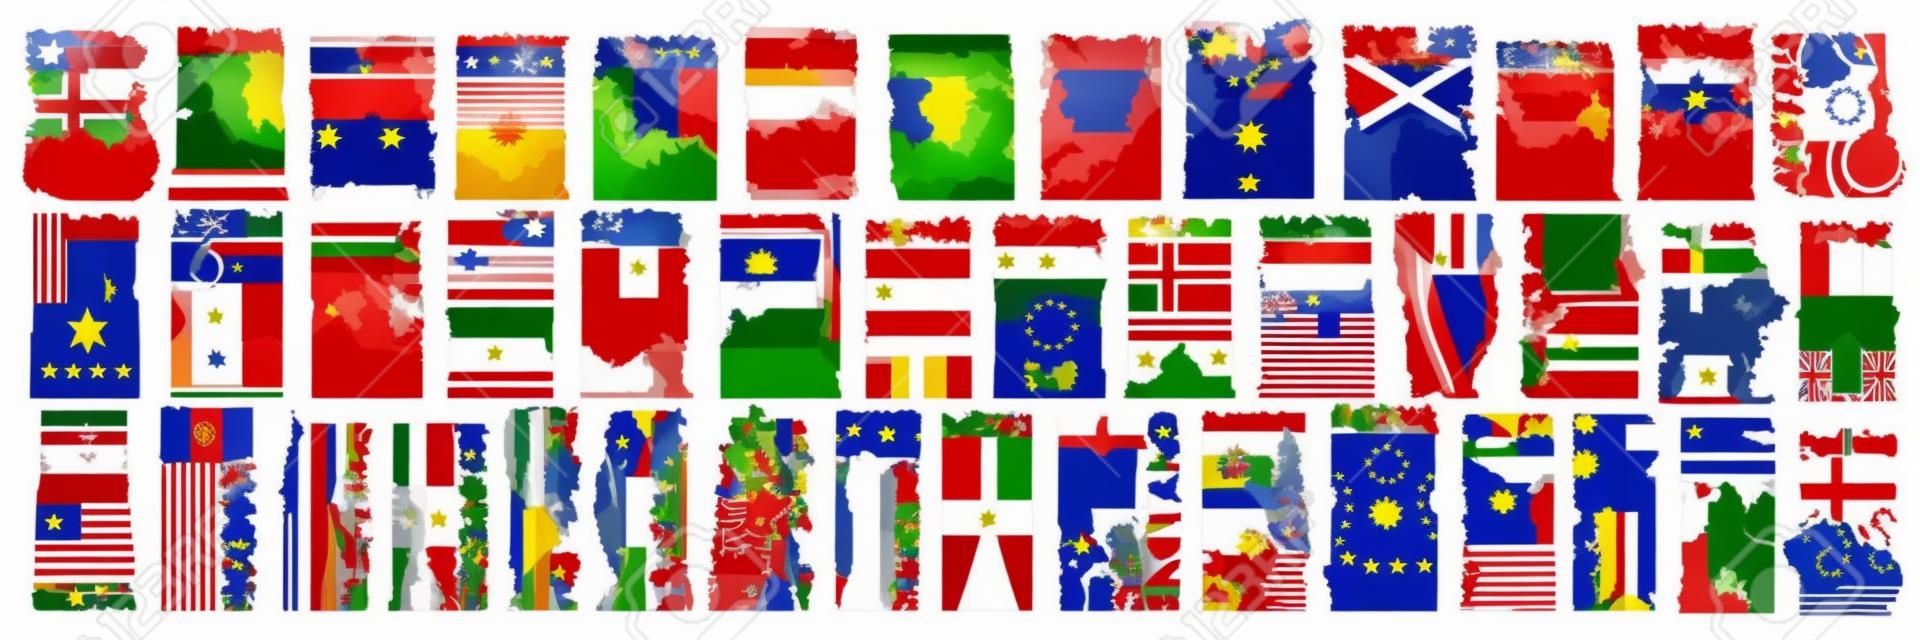 Vector set of European Countries with flags and symbols, 43 isolated vertical labels with national state flags and brush font for different words, art design stickers for european independence day.